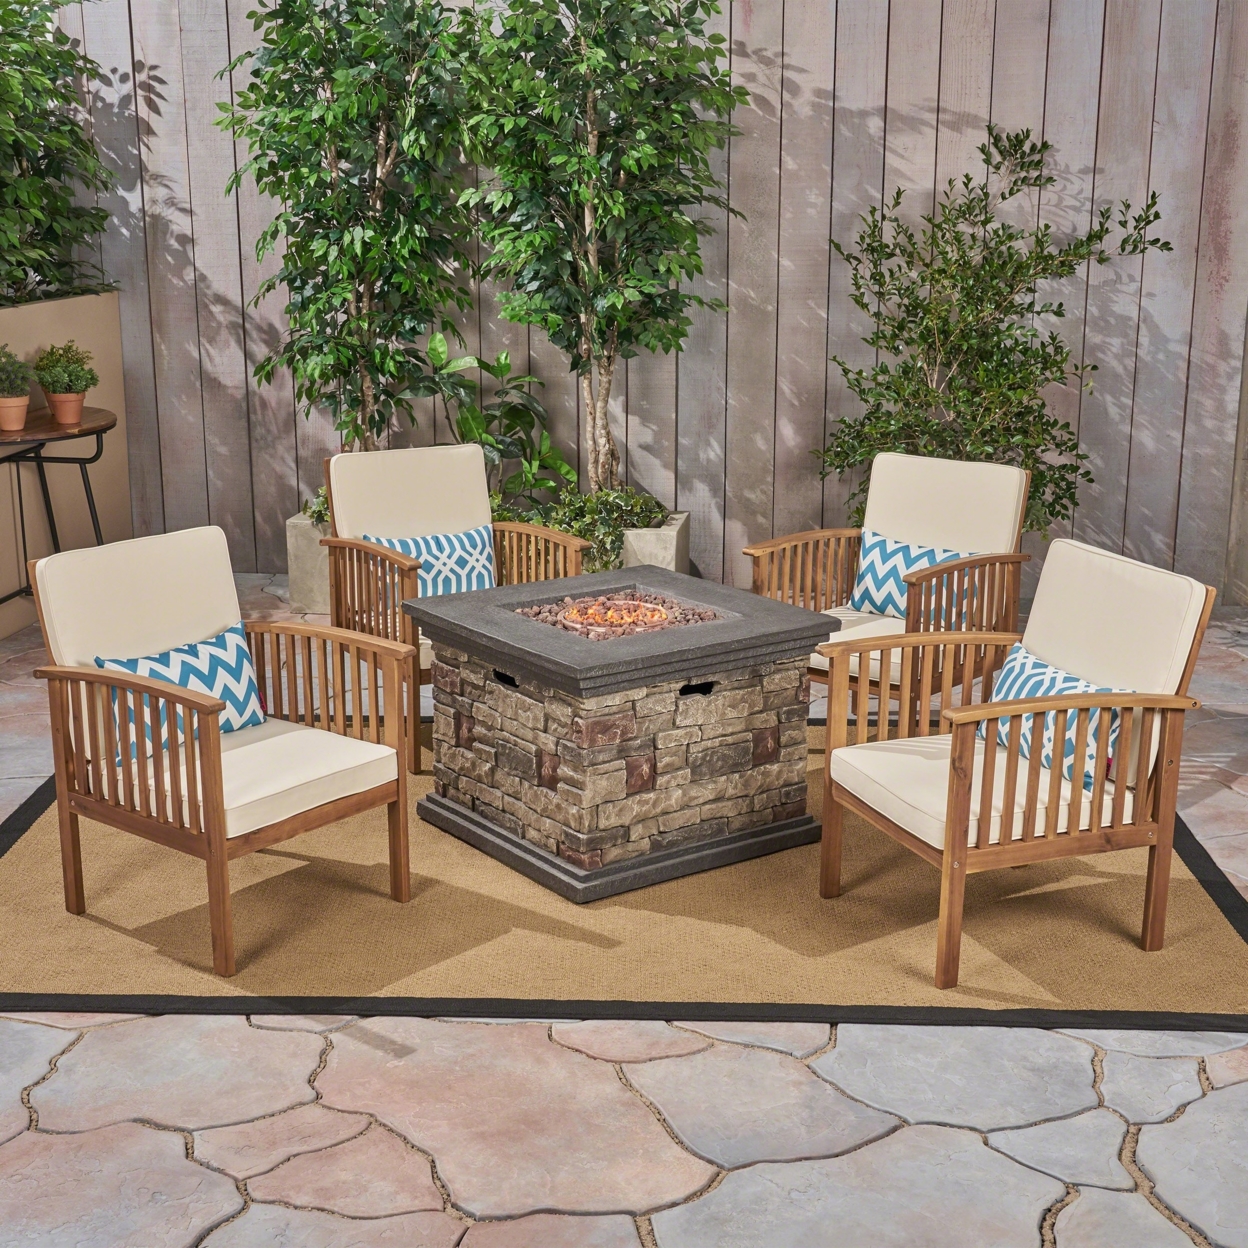 Carol Outdoor 4-Seater Acacia Wood Club Chairs With Firepit, Brown Patina Finish And Cream And Stone - Cream, Gray